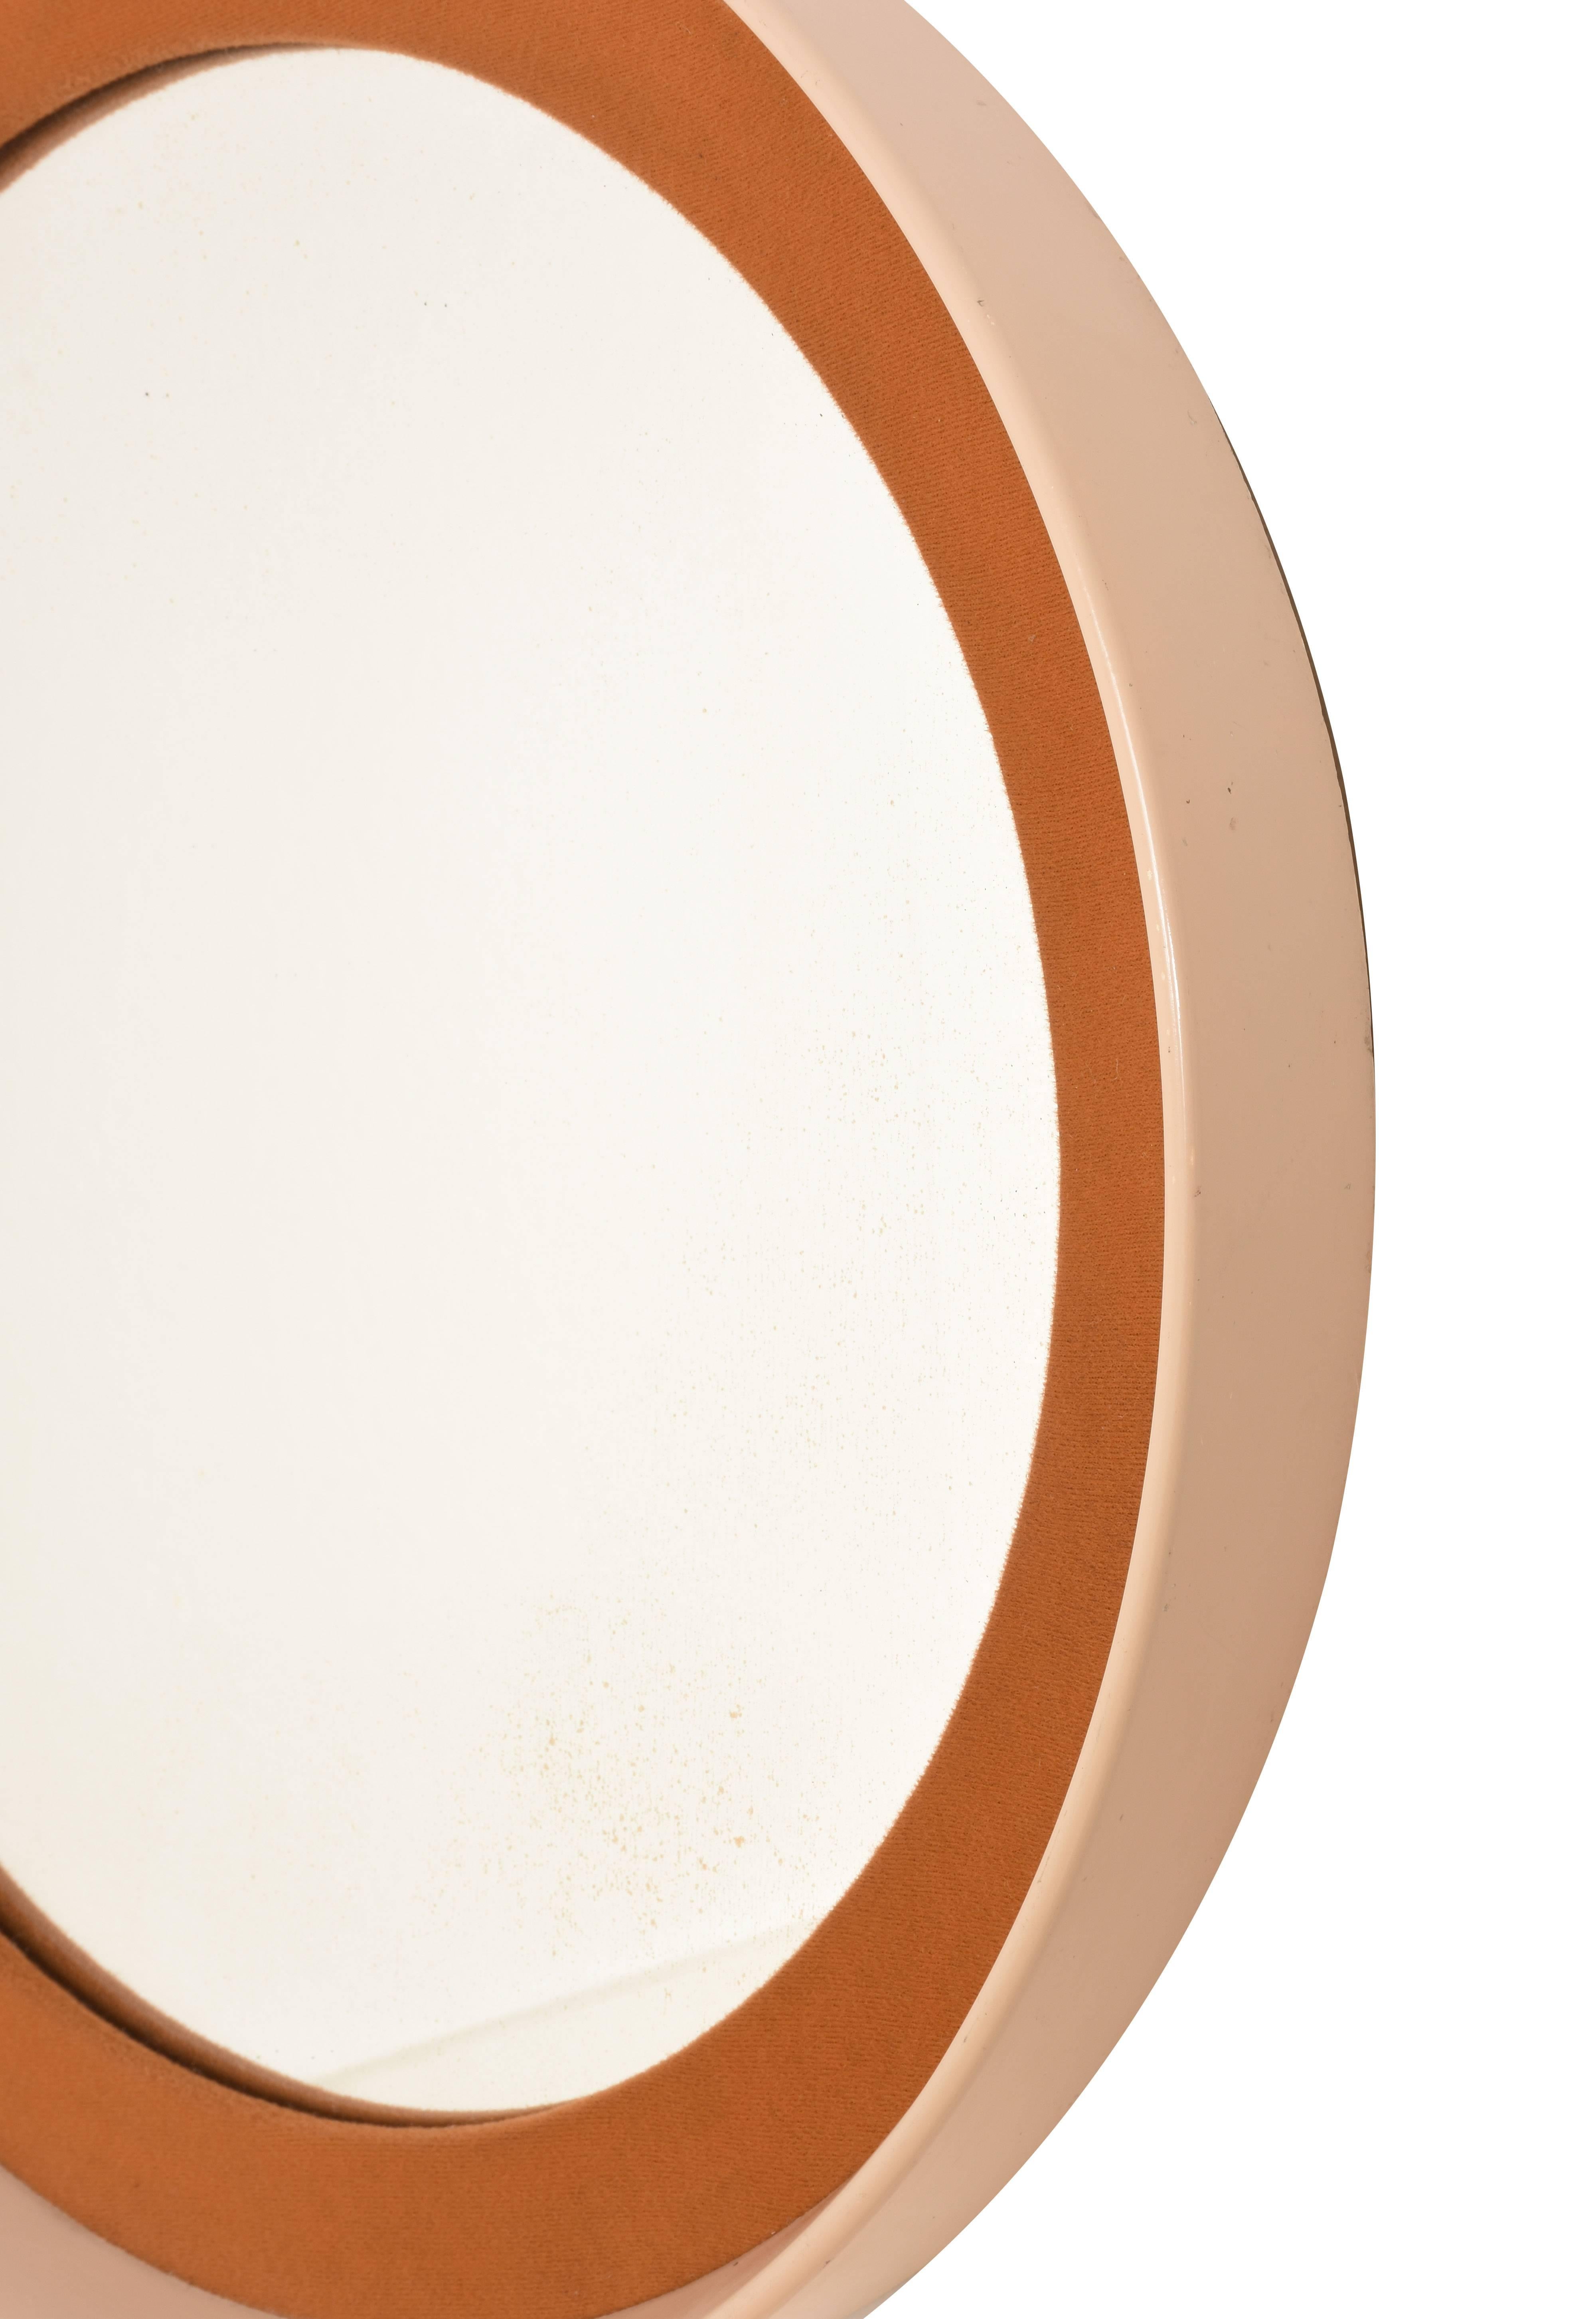 Round Mirror with Frame in Lacquered Wood and Fabric, Italy, 1970s Midcentury For Sale 2